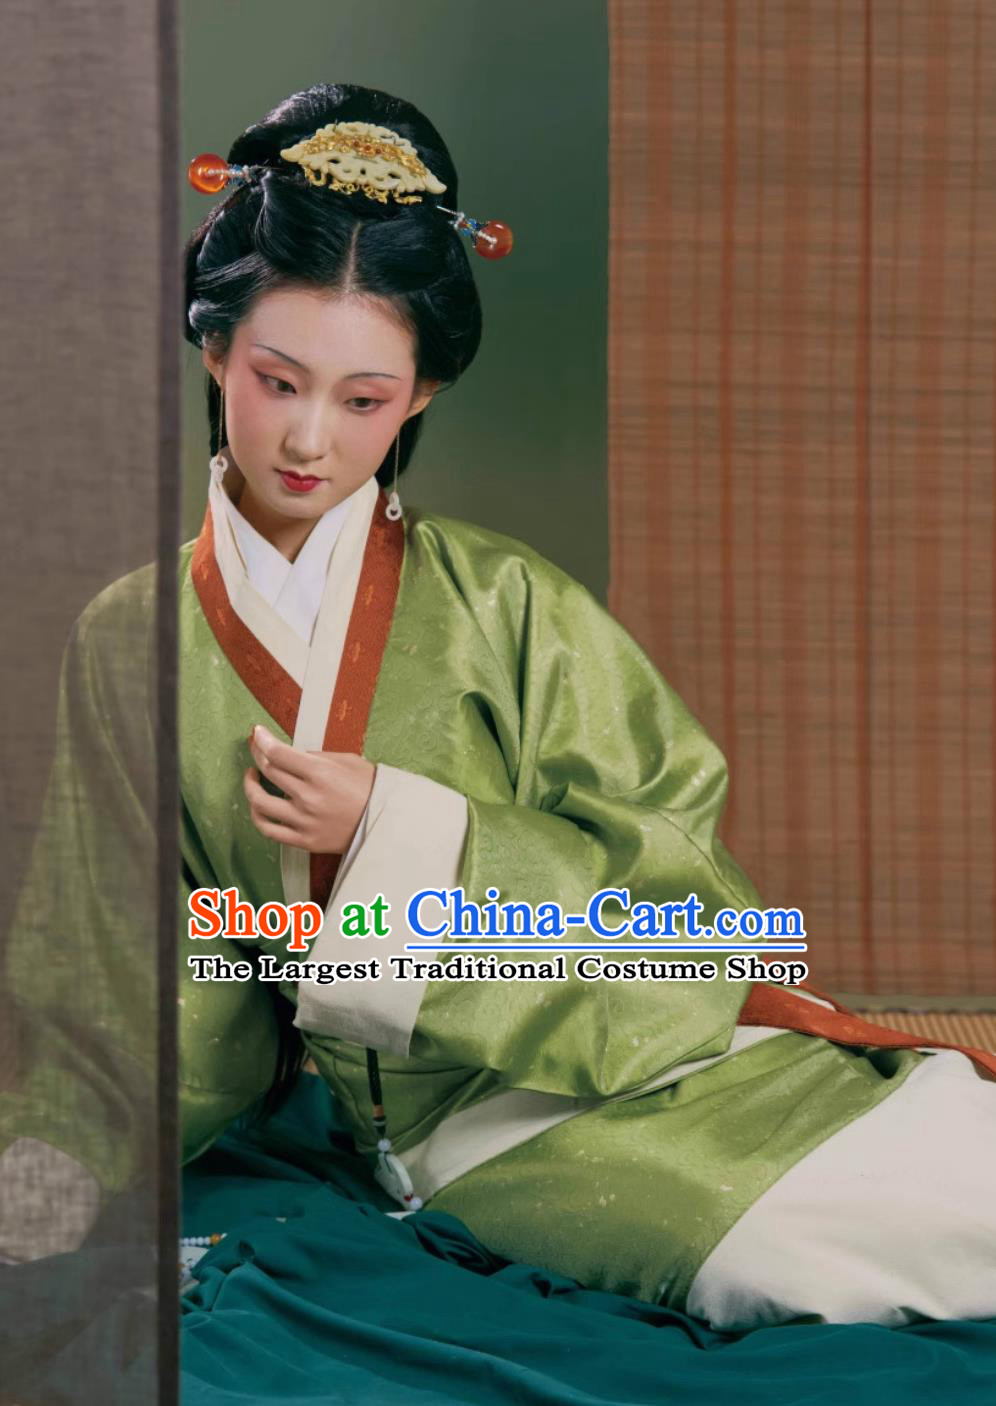 Traditional Hanfu Green Curving Front Robe Chinese Qin Dynasty Empress Costume Ancient China Court Woman Clothing